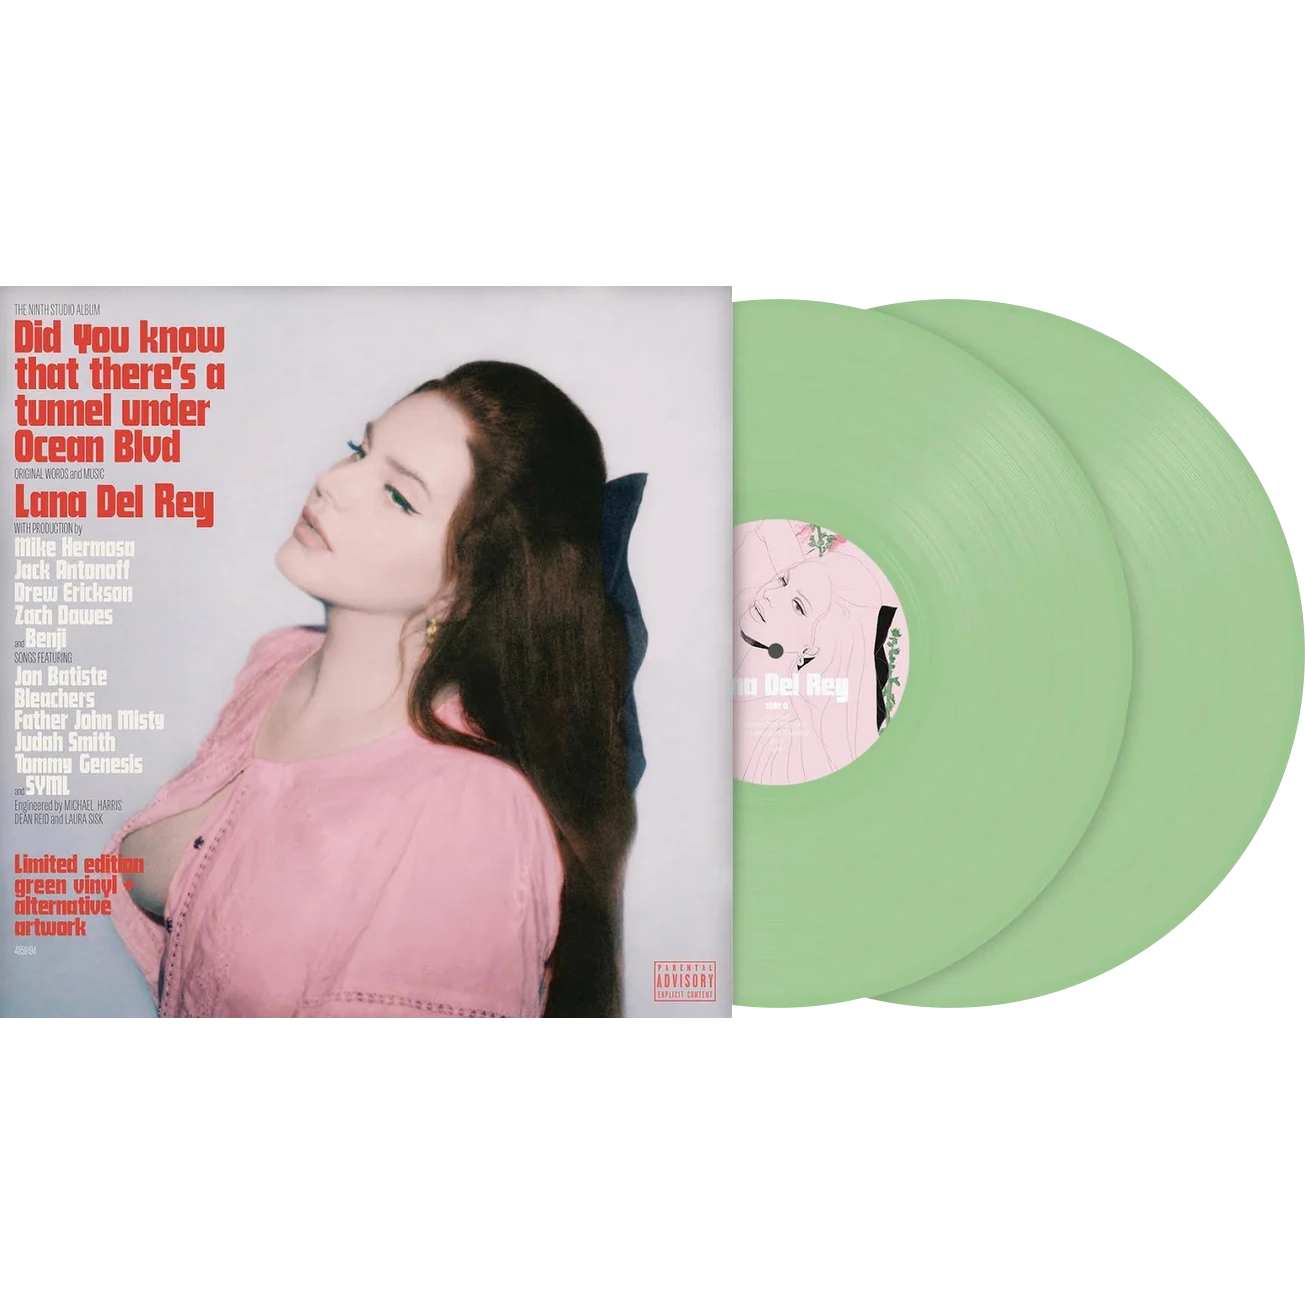 Did You Know Theres A Tunnel Under Ocean Blvd (Green Alternate Cover 2lp Edition) (Vinyl)